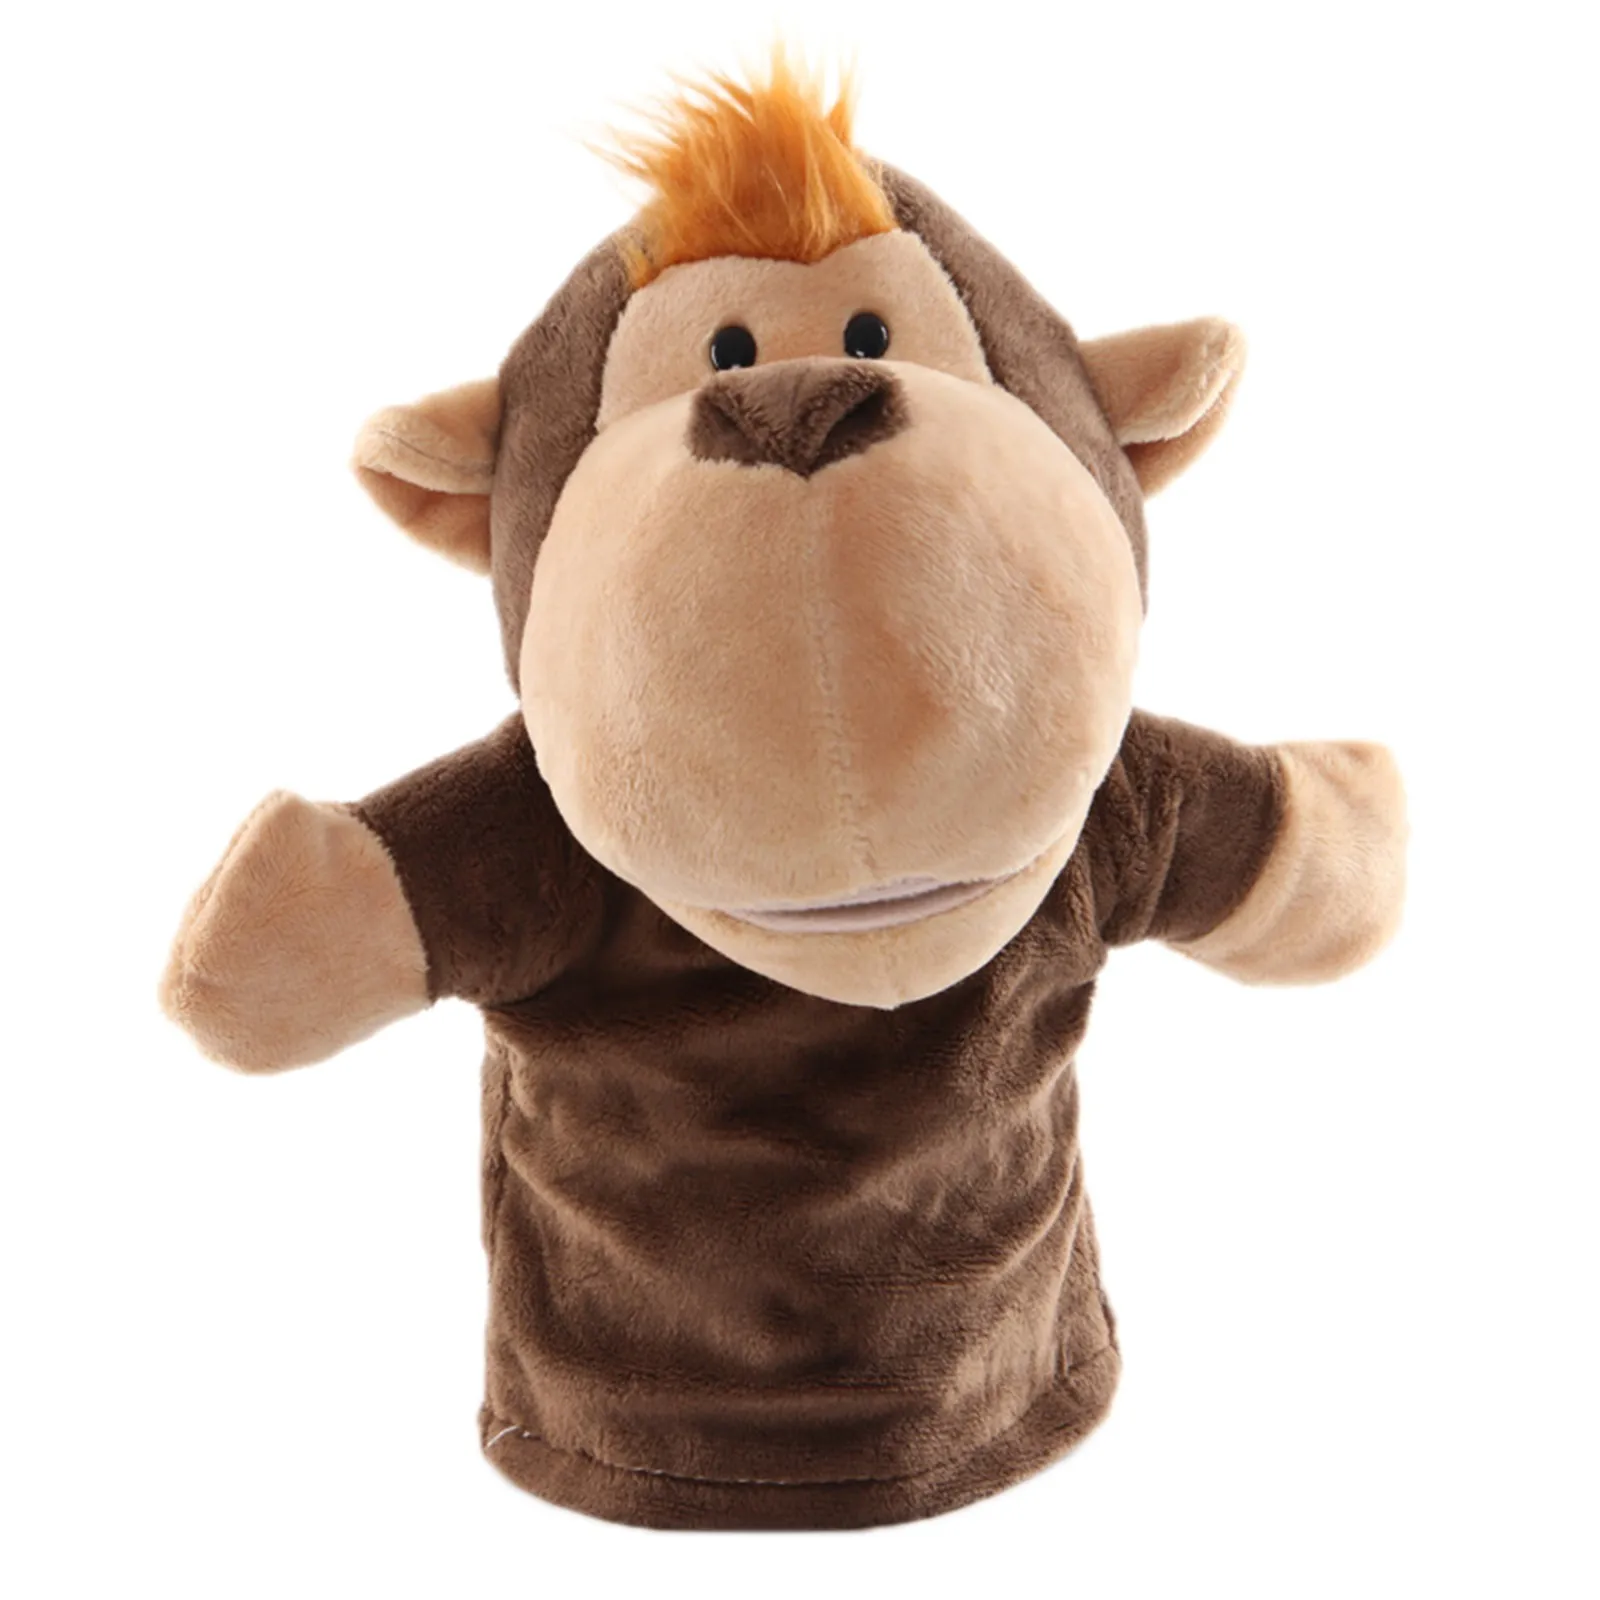 

Cartoon Monkey Plush Toy Hand Puppet Cute Animal Puppets Doll Parent-child Educational Interaction Fun Toys For Kids Children